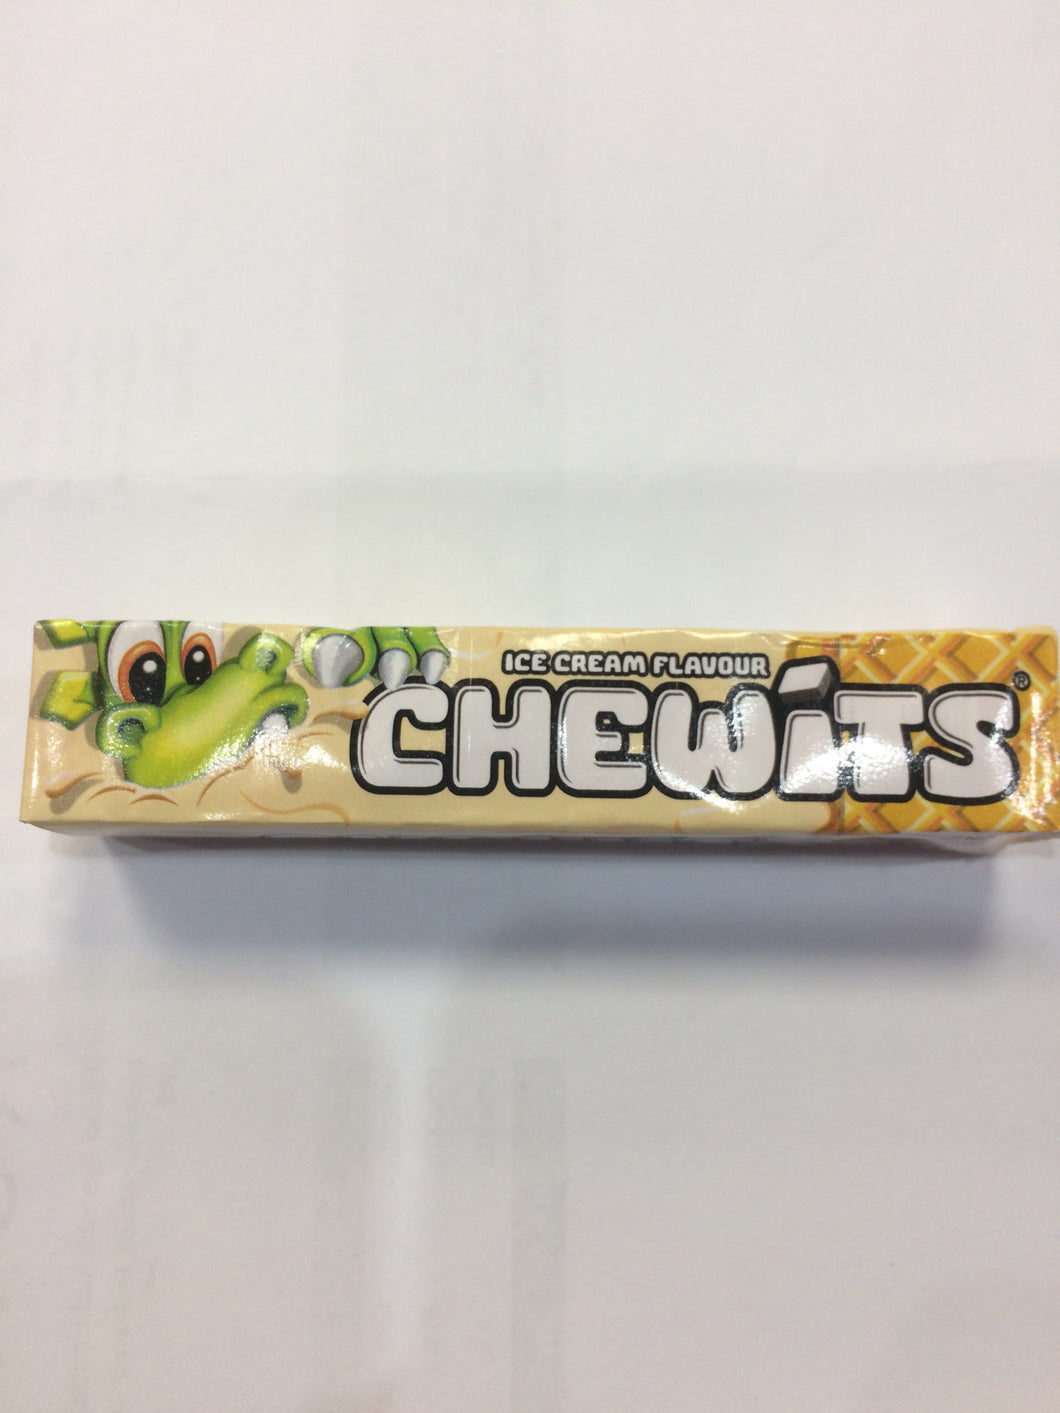 Chewits Ice Cream Flavour Ltd Edition Sweets 30g